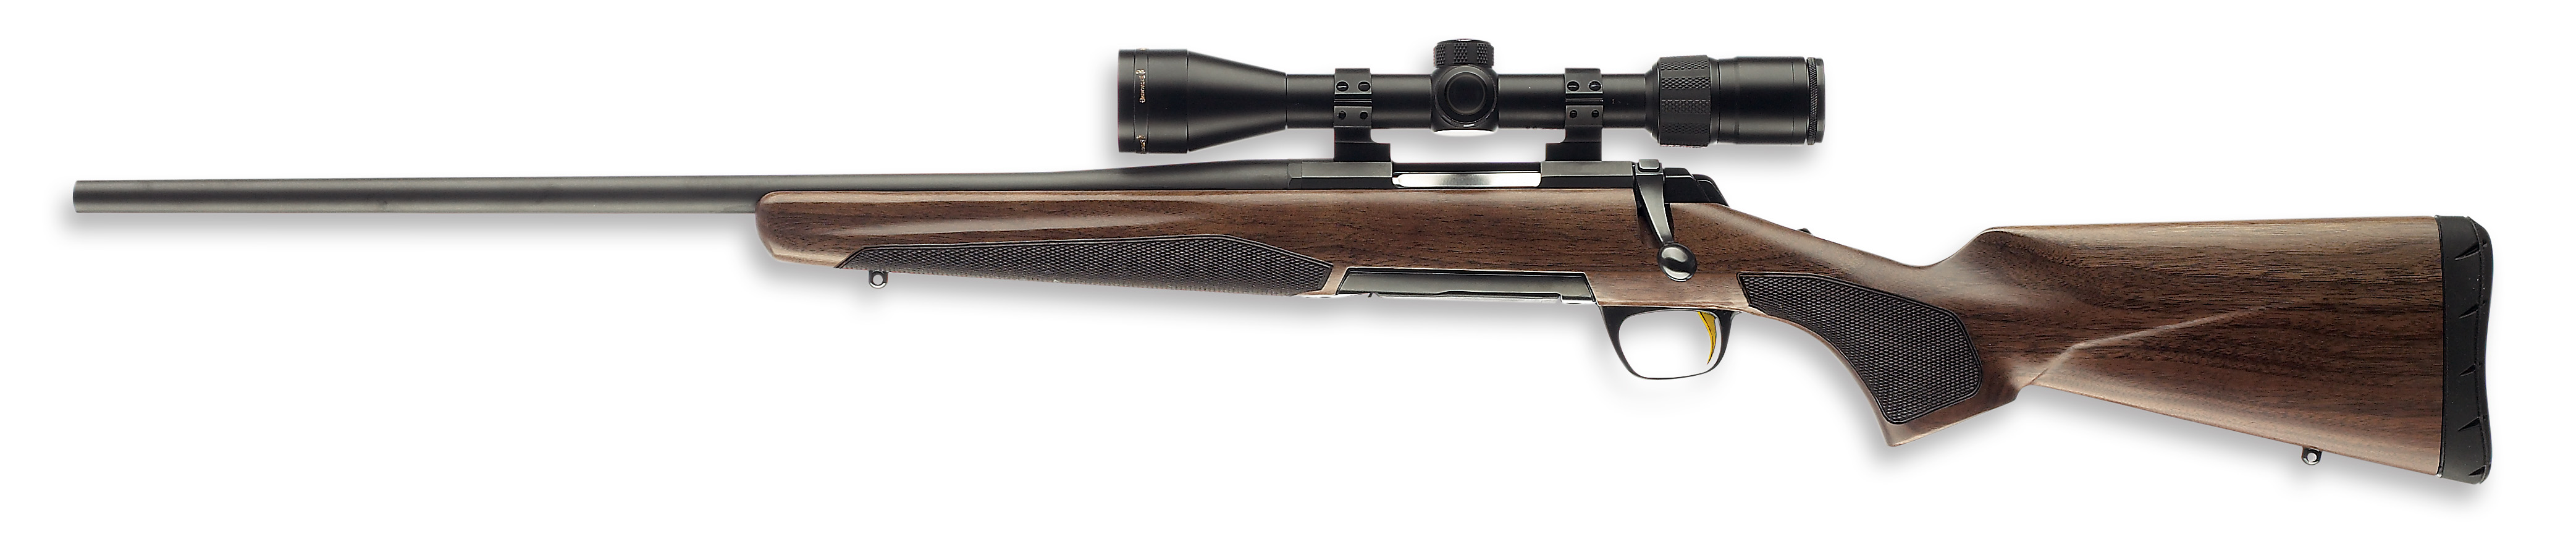 Left-Hand X-Bolt Rifles Now Available From Browning